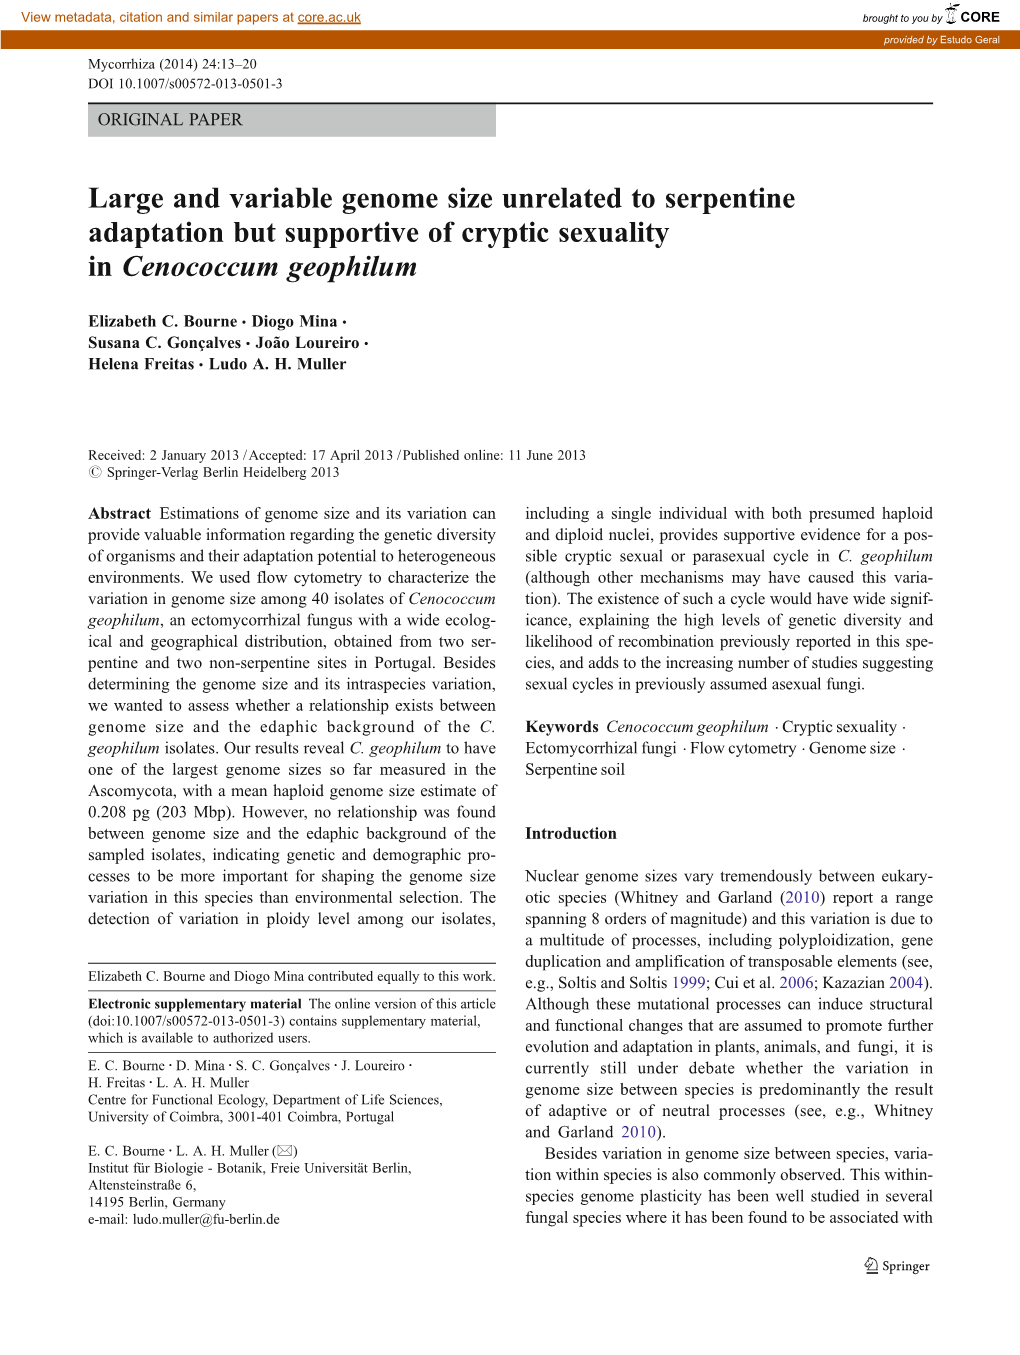 Large and Variable Genome Size Unrelated to Serpentine Adaptation but Supportive of Cryptic Sexuality in Cenococcum Geophilum